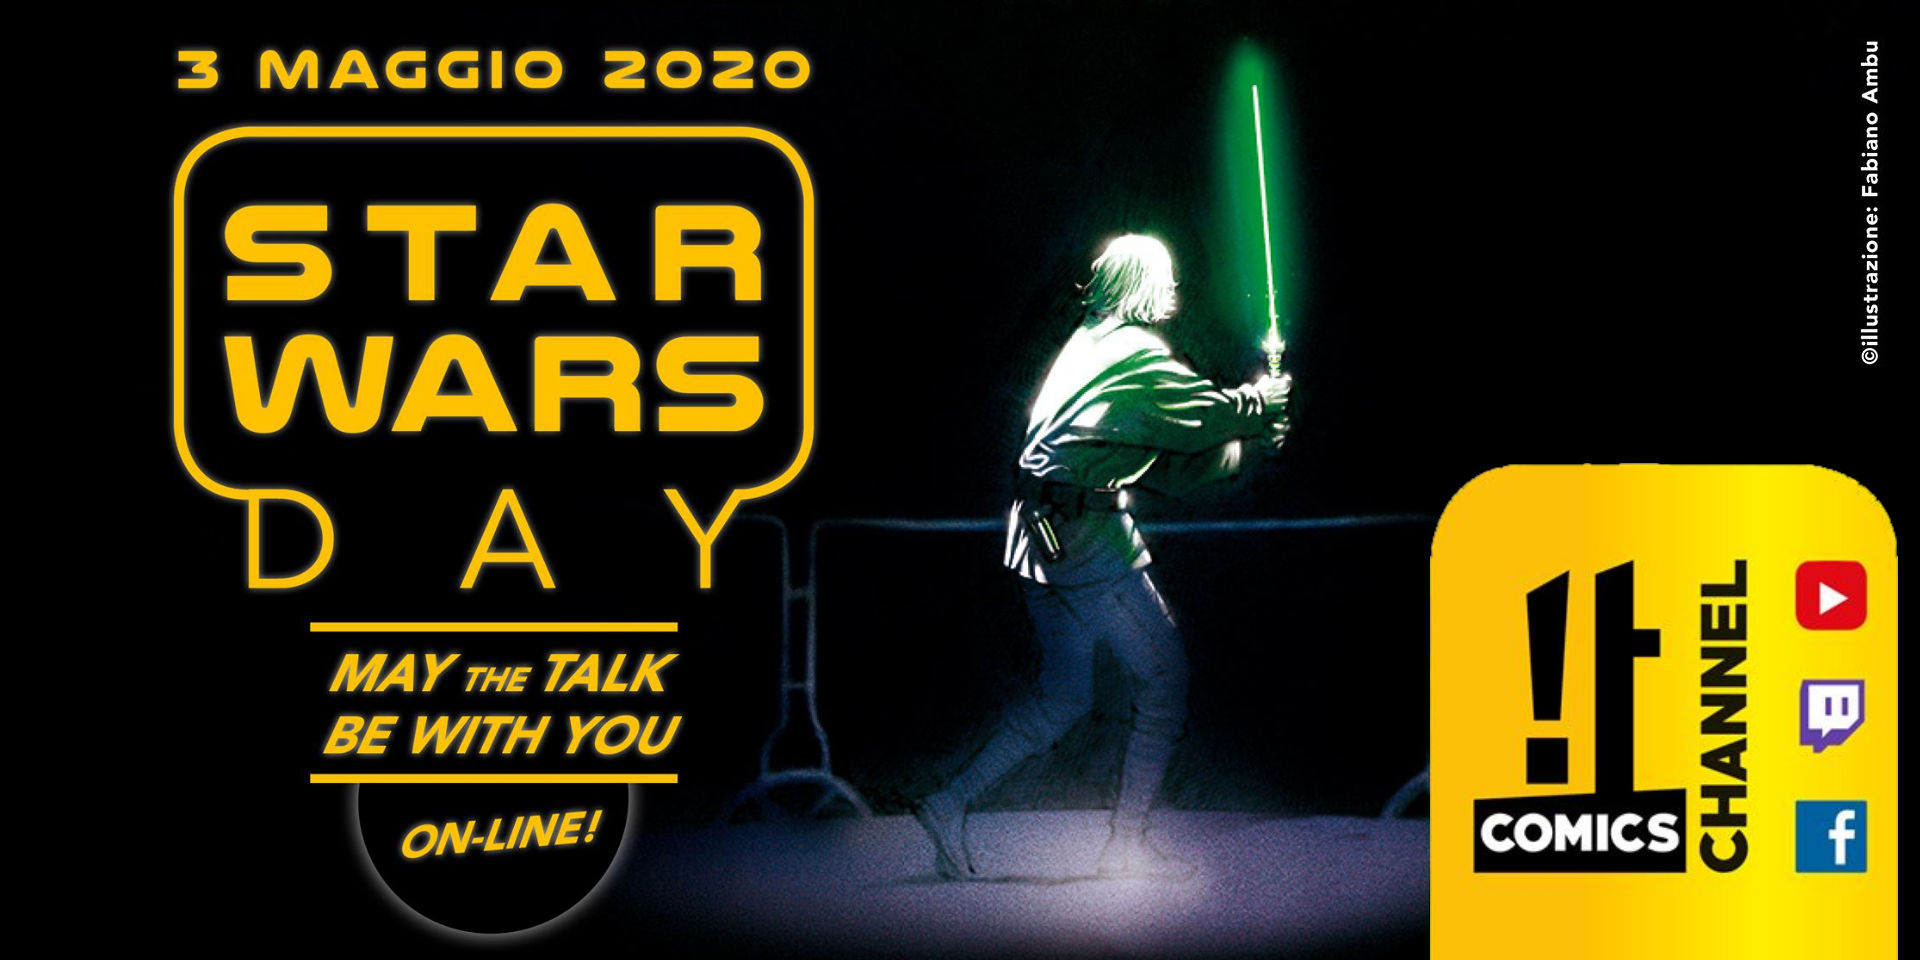 Le Legioni di Star Wars: May the Talk be with you